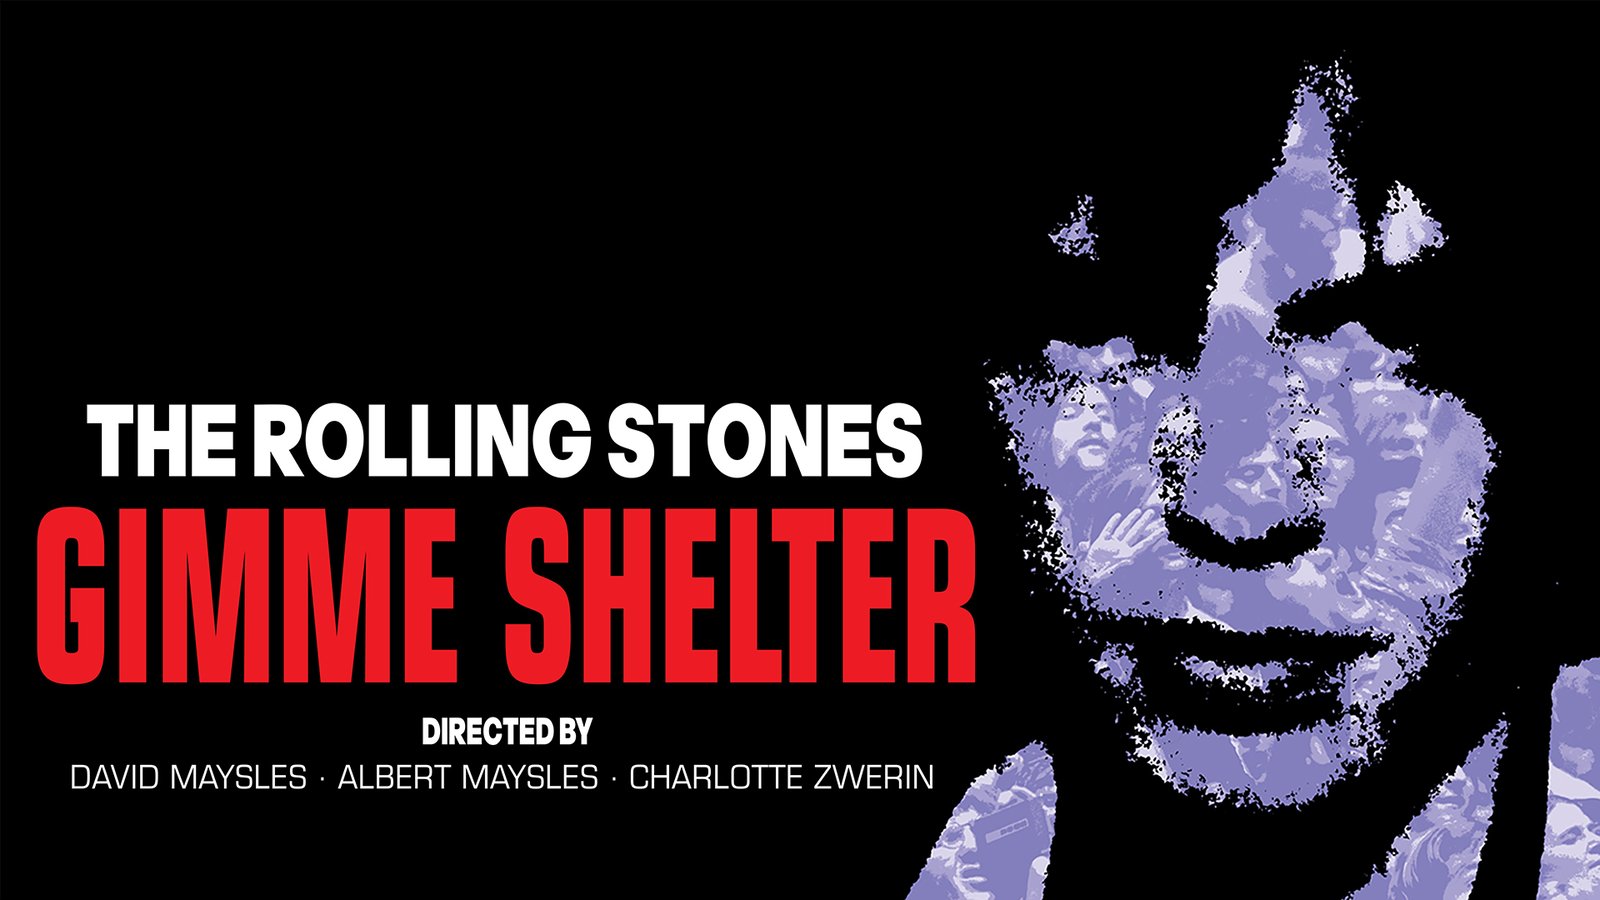 Gimme Shelter - The Rolling Stones 1969 Tour